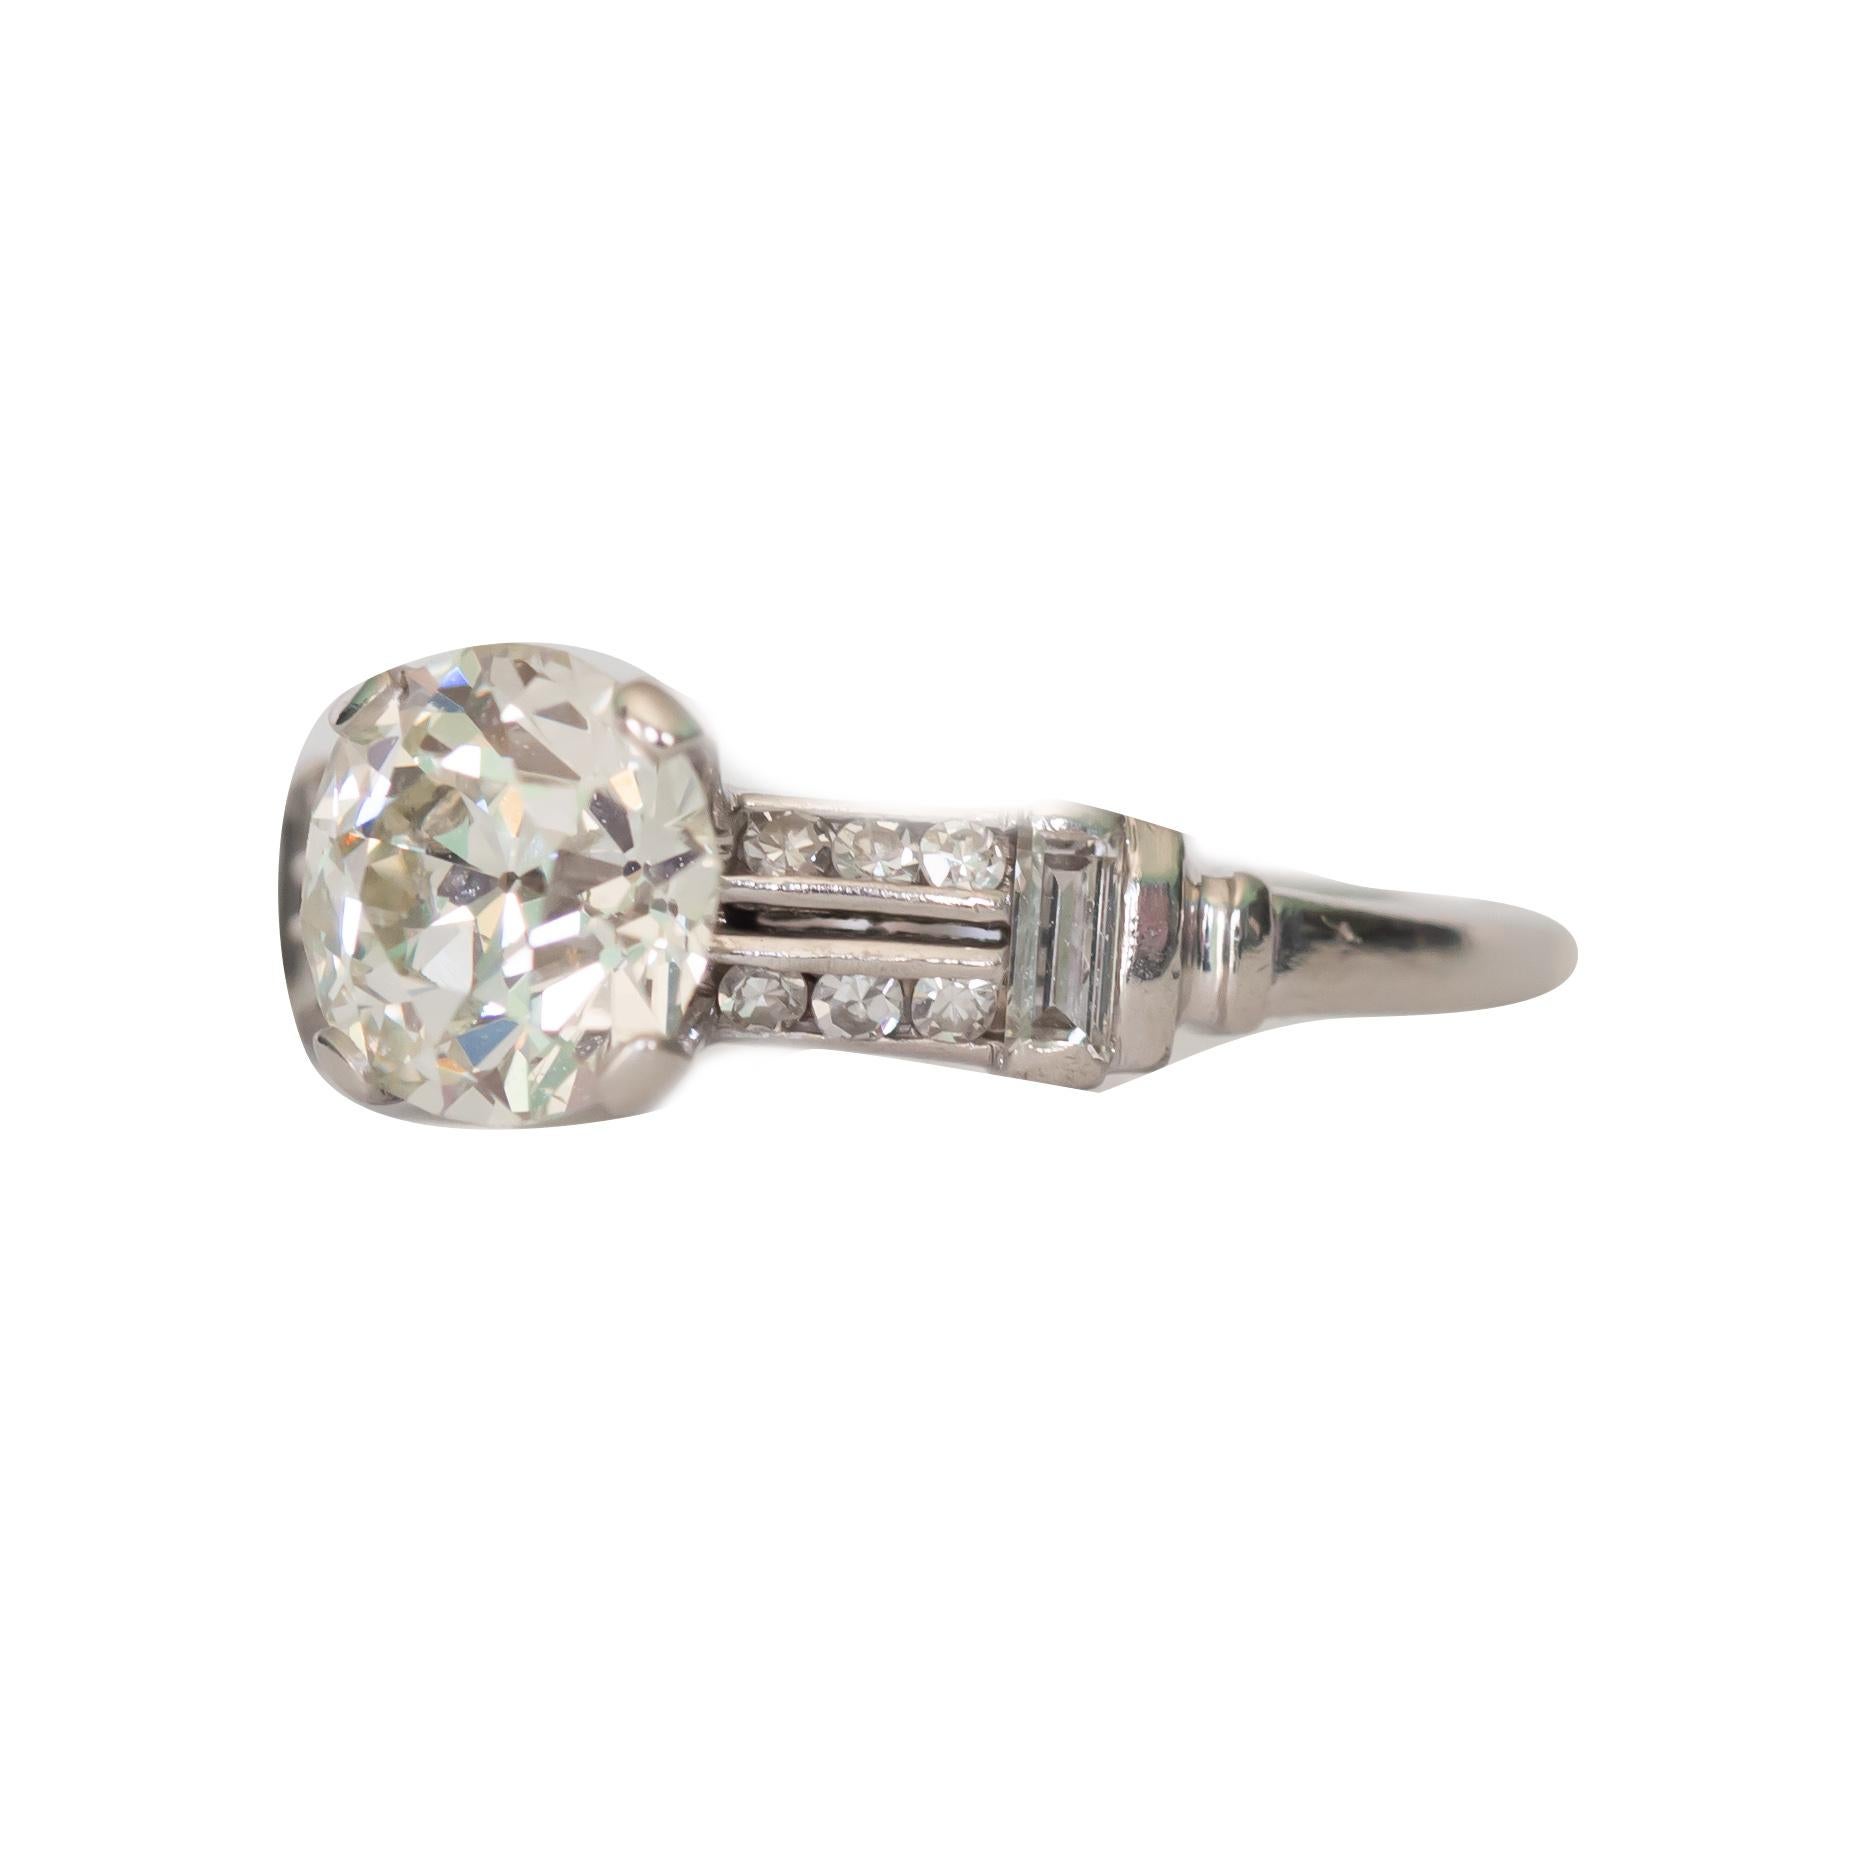 Ring Size: 5.25
Metal Type: Platinum  [Hallmarked, and Tested]
Weight:  3  grams

Center Diamond Details:
Weight: 1.04 carat
Cut: Old European Brilliant
Color: J
Clarity: VS1

Side Diamond Details:
Weight: .20 carat, total weight
Cut: Antique single